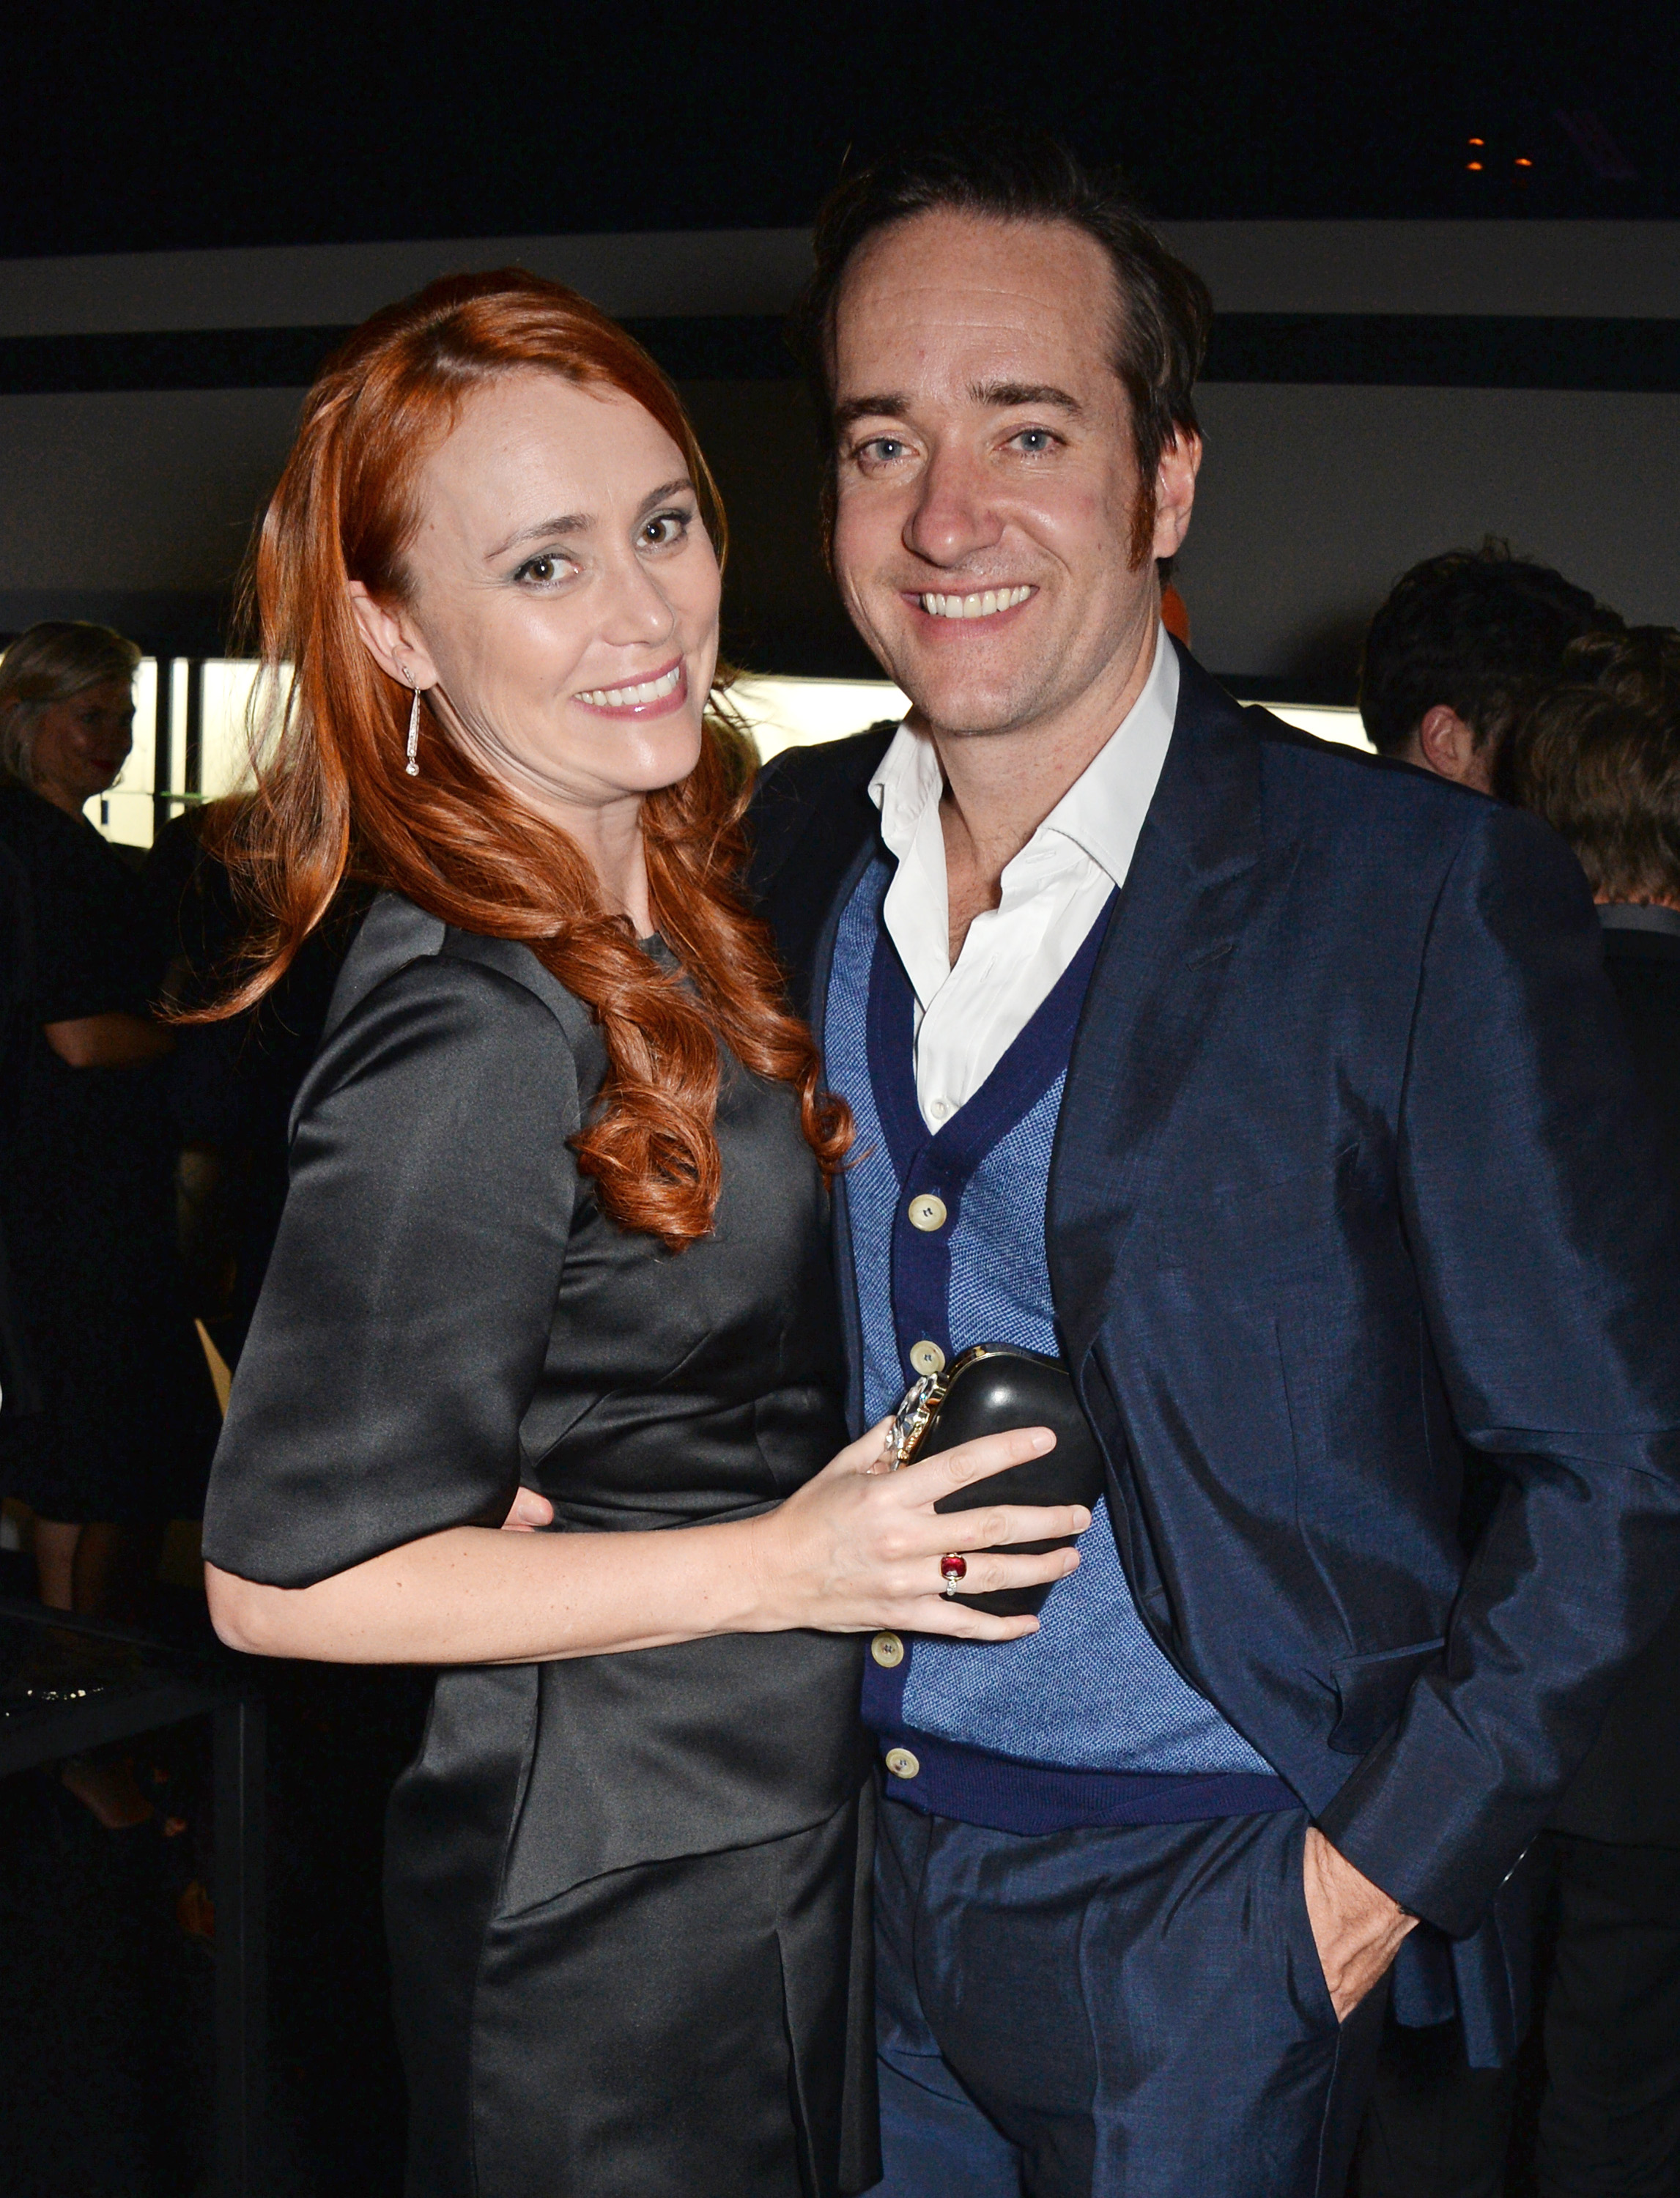 Keeley Hawes and Matthew Macfadyen attend the BFI London Film Festival IWC Gala Dinner in honour of the BFI at Battersea Evolution Marquee on October 7, 2014, in London, England. | Source: Getty Images